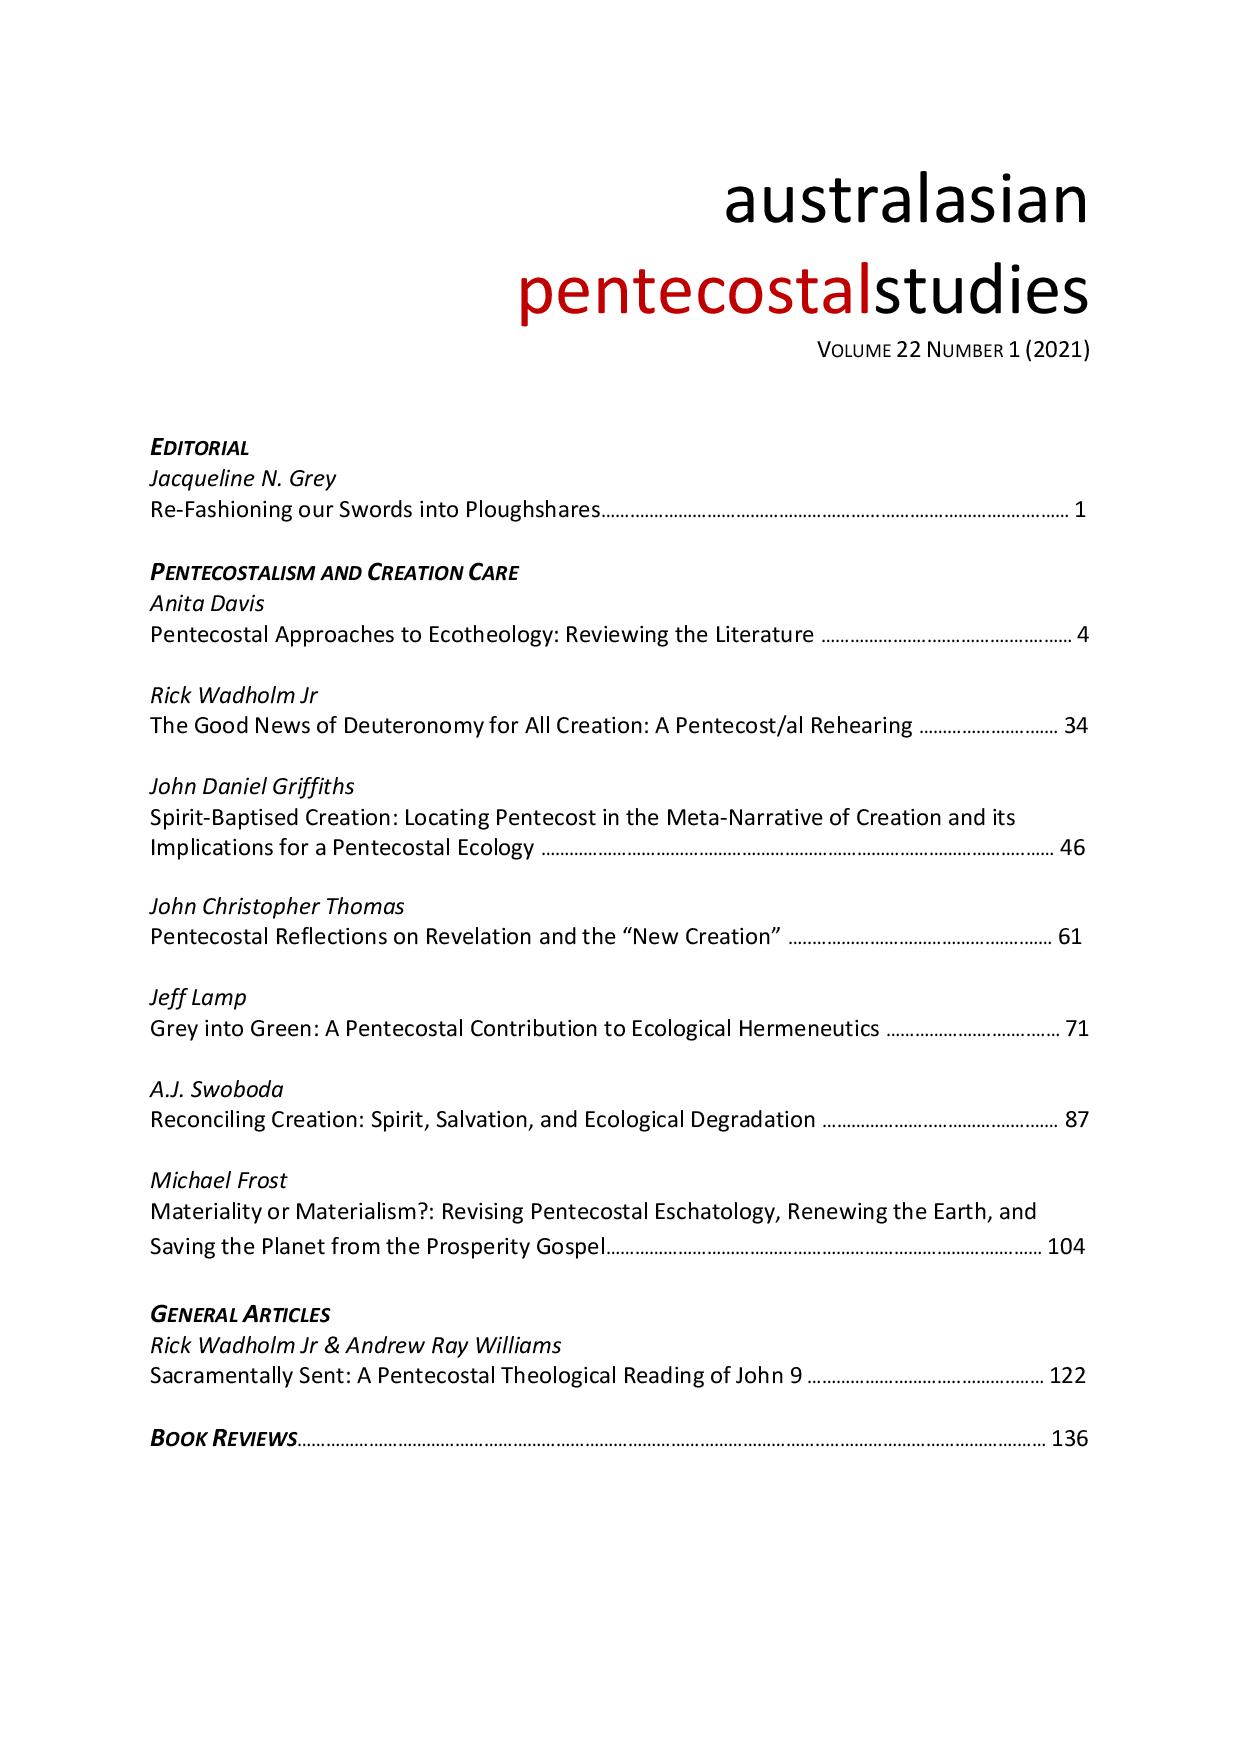 Special Issue: Pentecostals and Creation Care